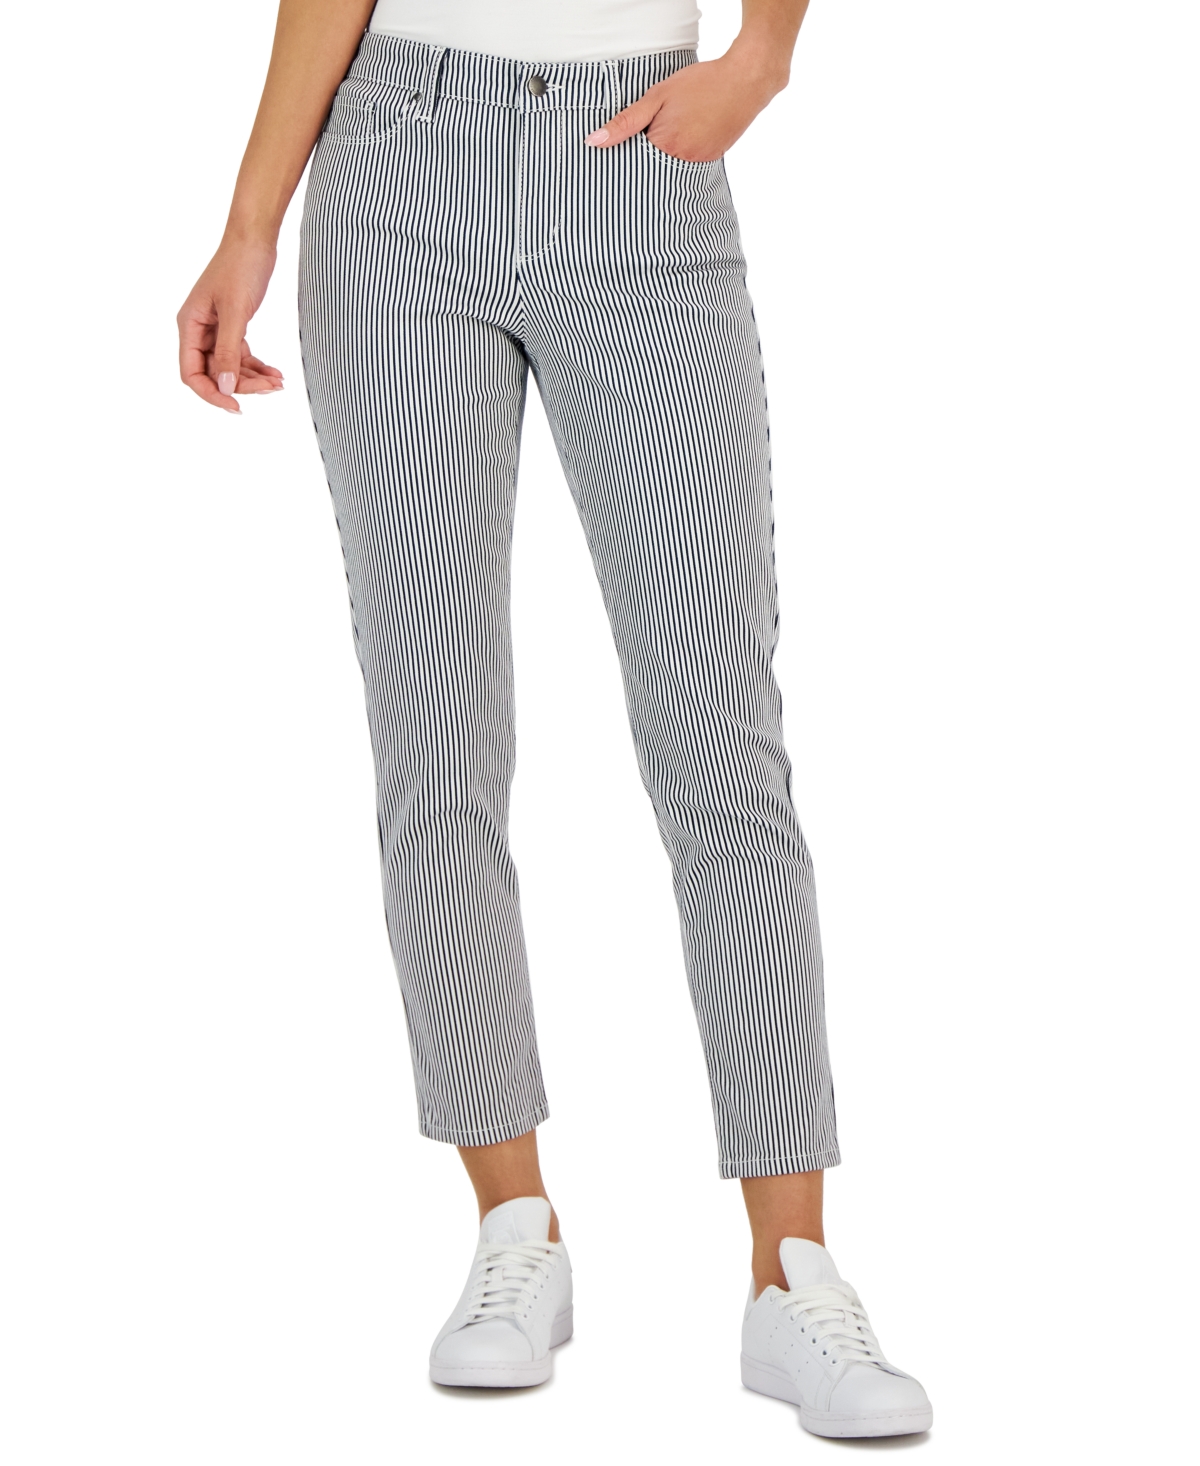  Charter Club Women's Striped Skinny Ankle Jeans, Created for Macy's